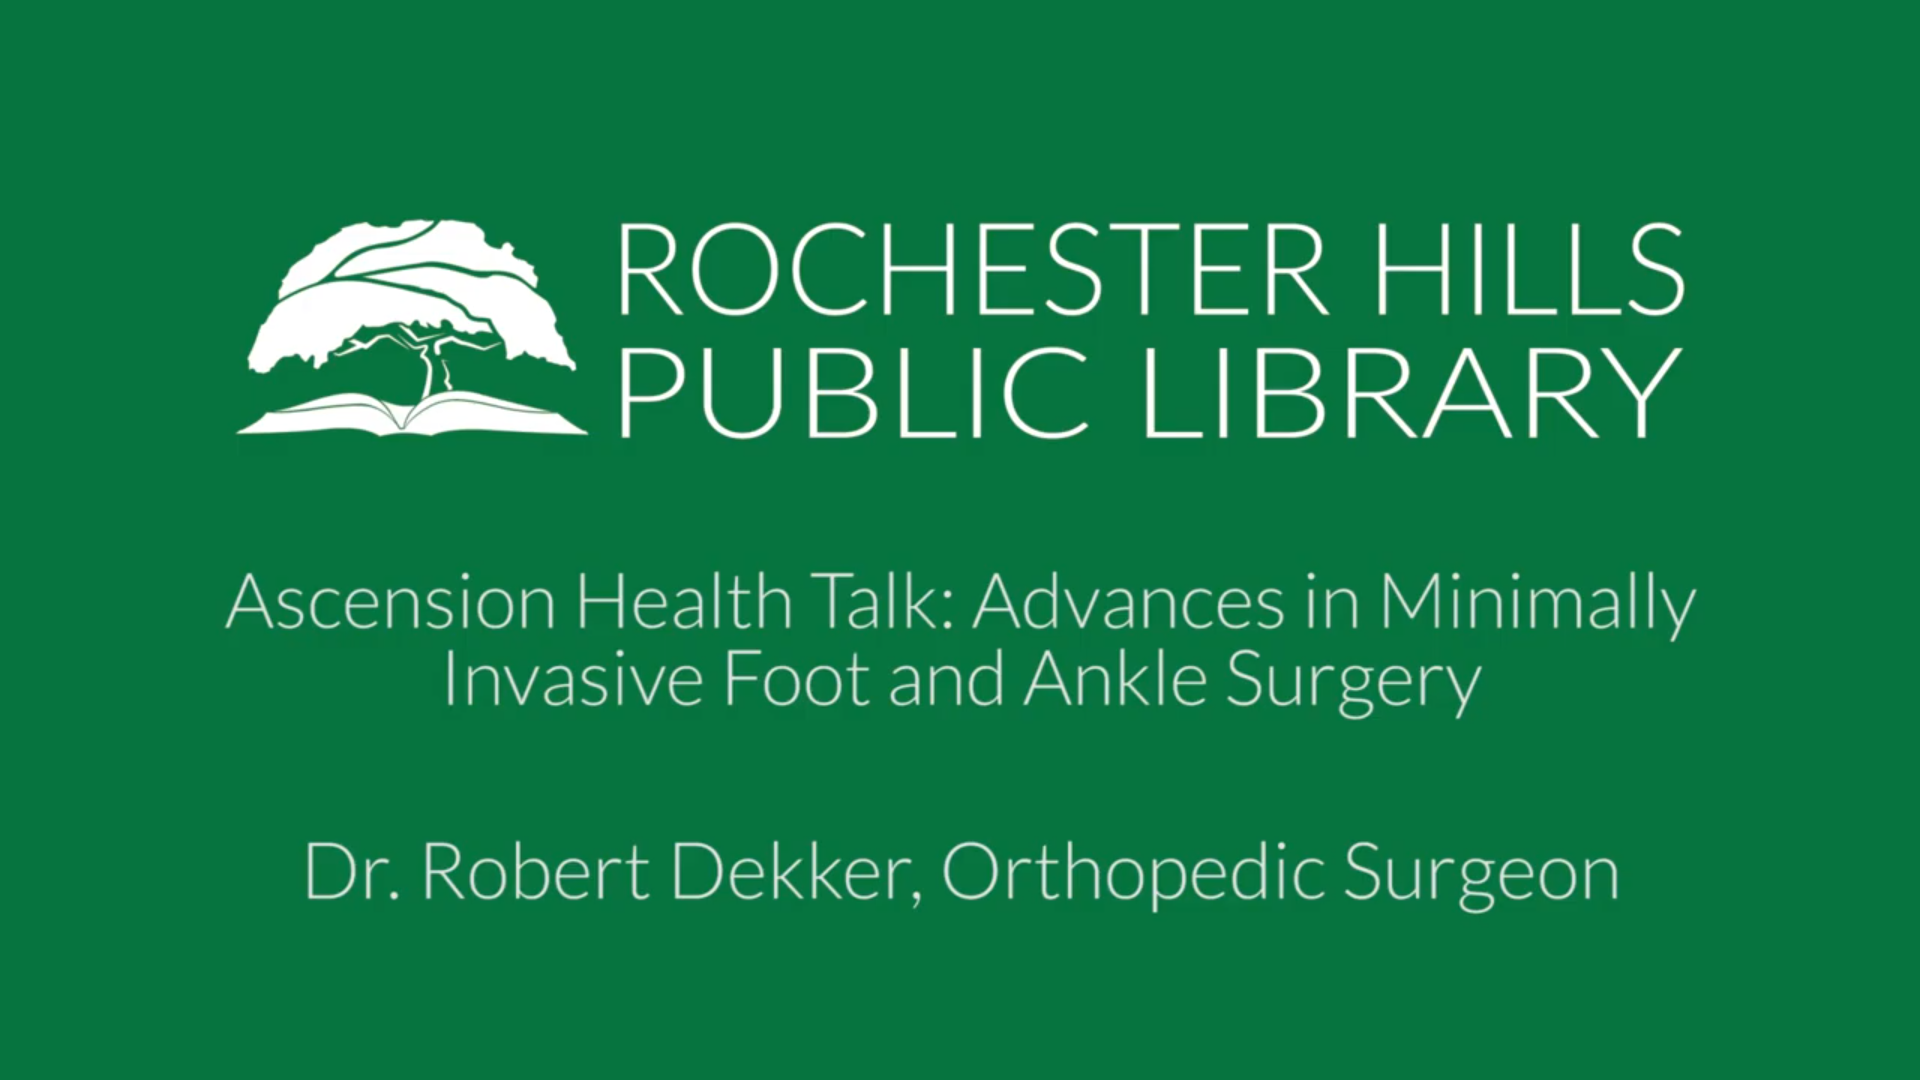 Ascension Health Talk: Advances in Minimally Invasive Foot and Ankle Surgery